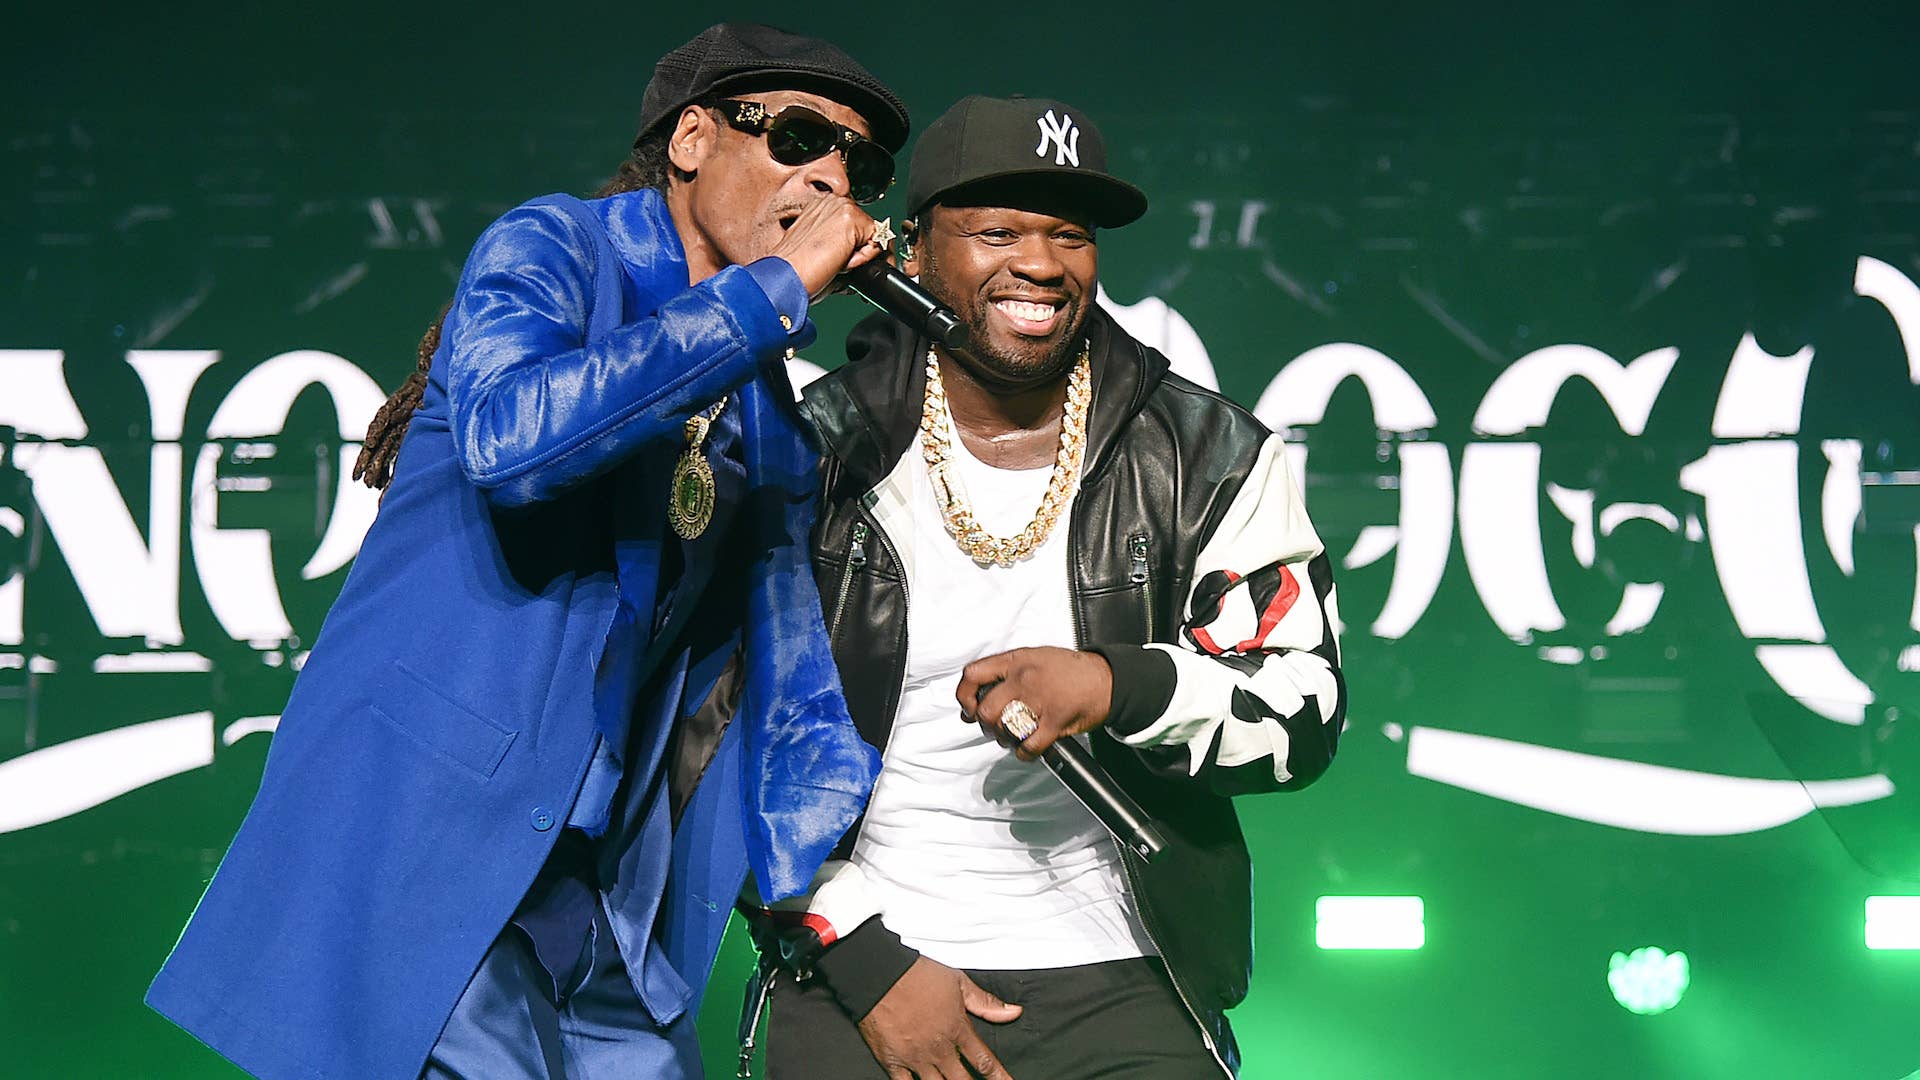 Snoop Dogg and 50 Cent performing at MSG